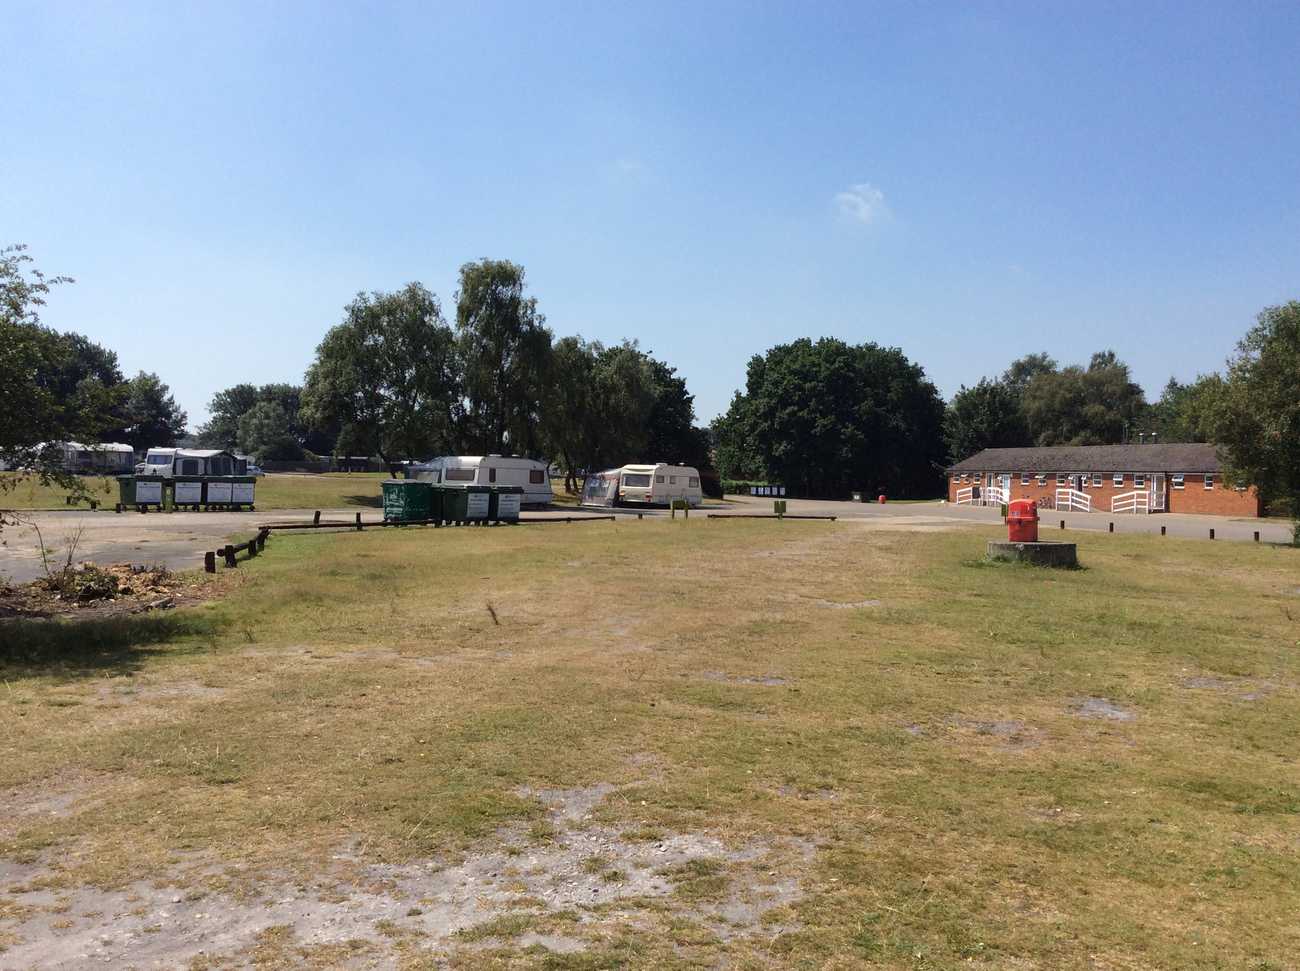 The New Forest - Holmsley campsite